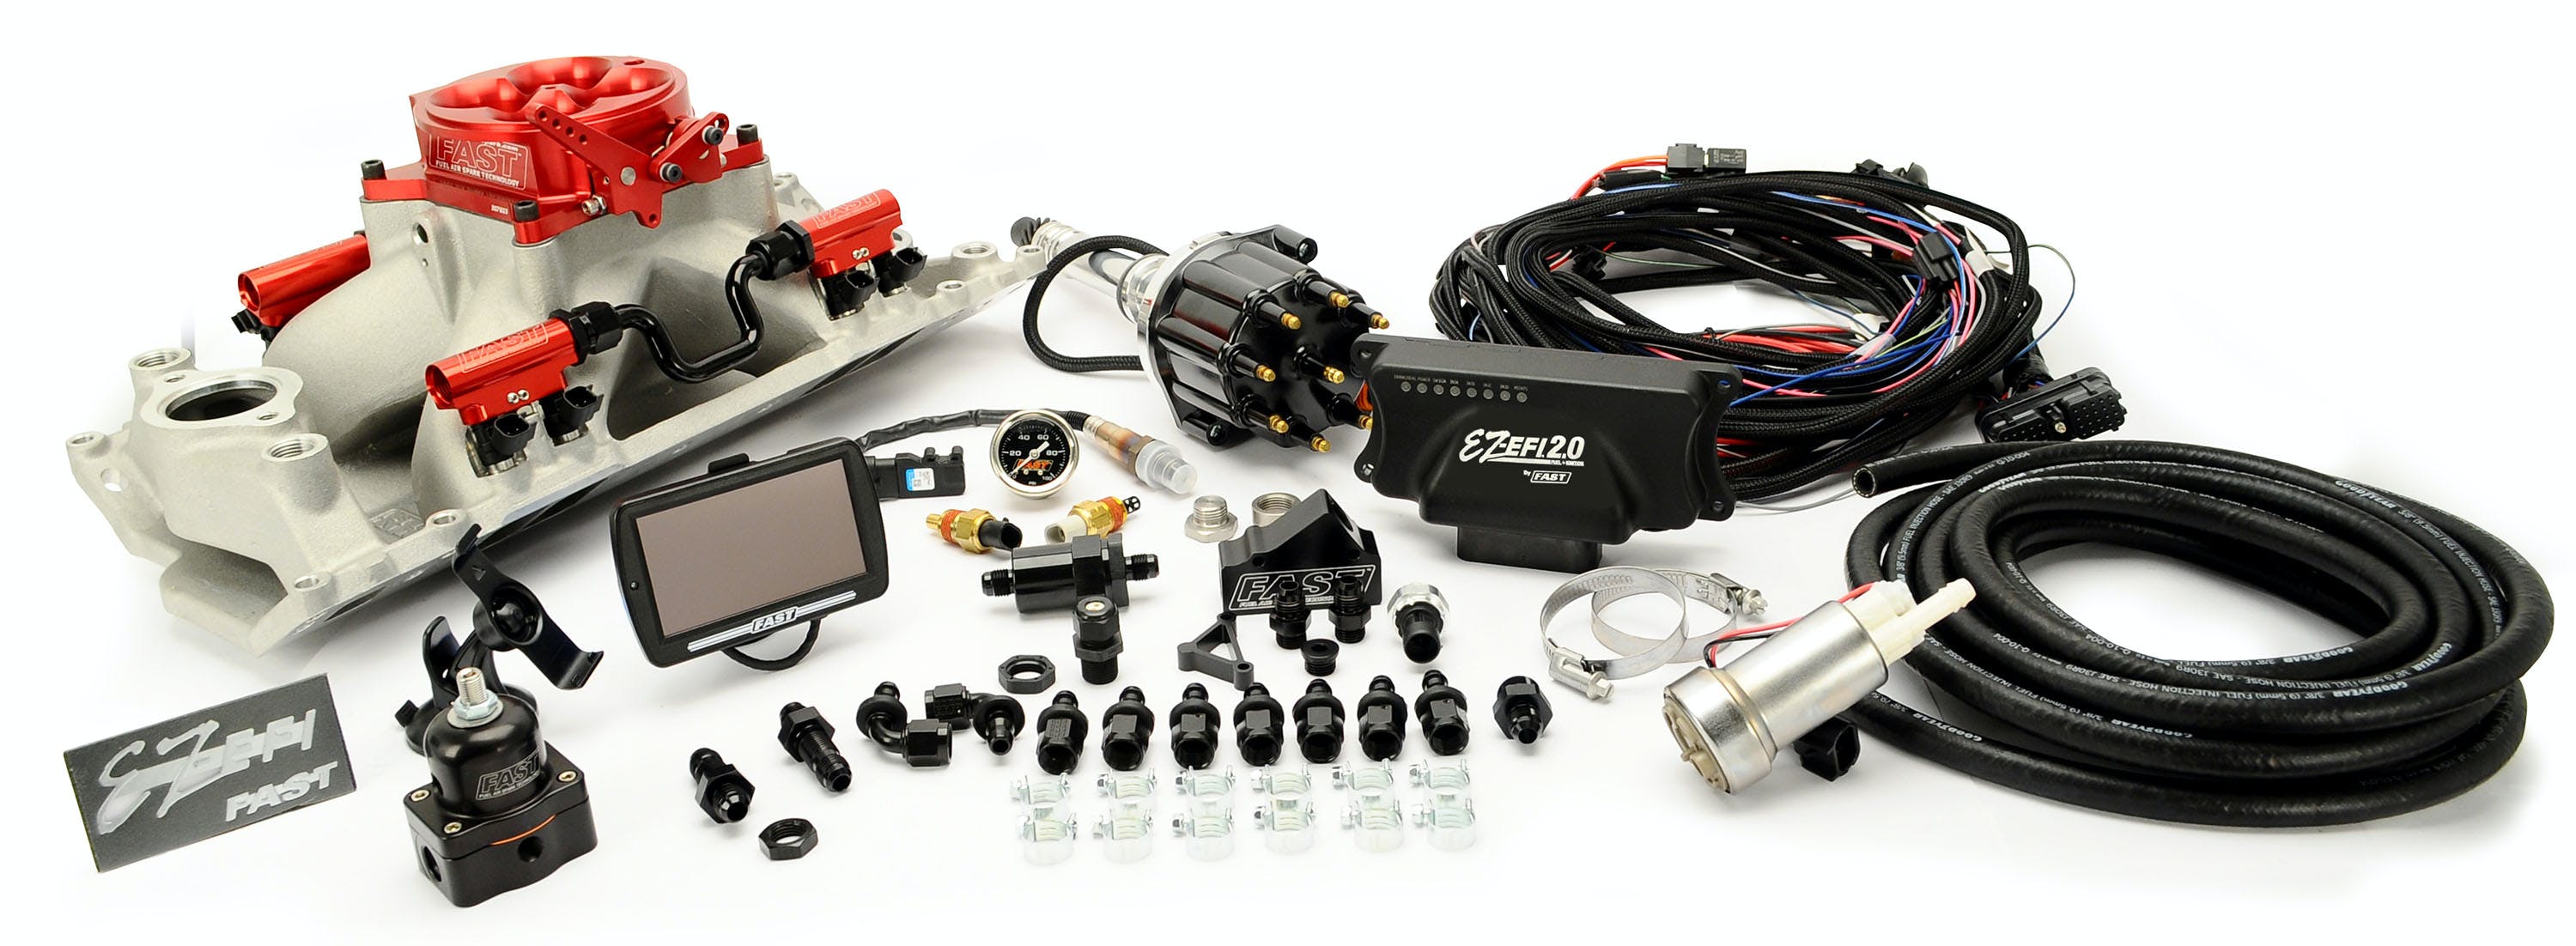 FAST - Fuel Air Spark Technology 30411-10L EZ 2.0 BBC Multiport w/intake, rails, throttle body, distributor and fuel pump